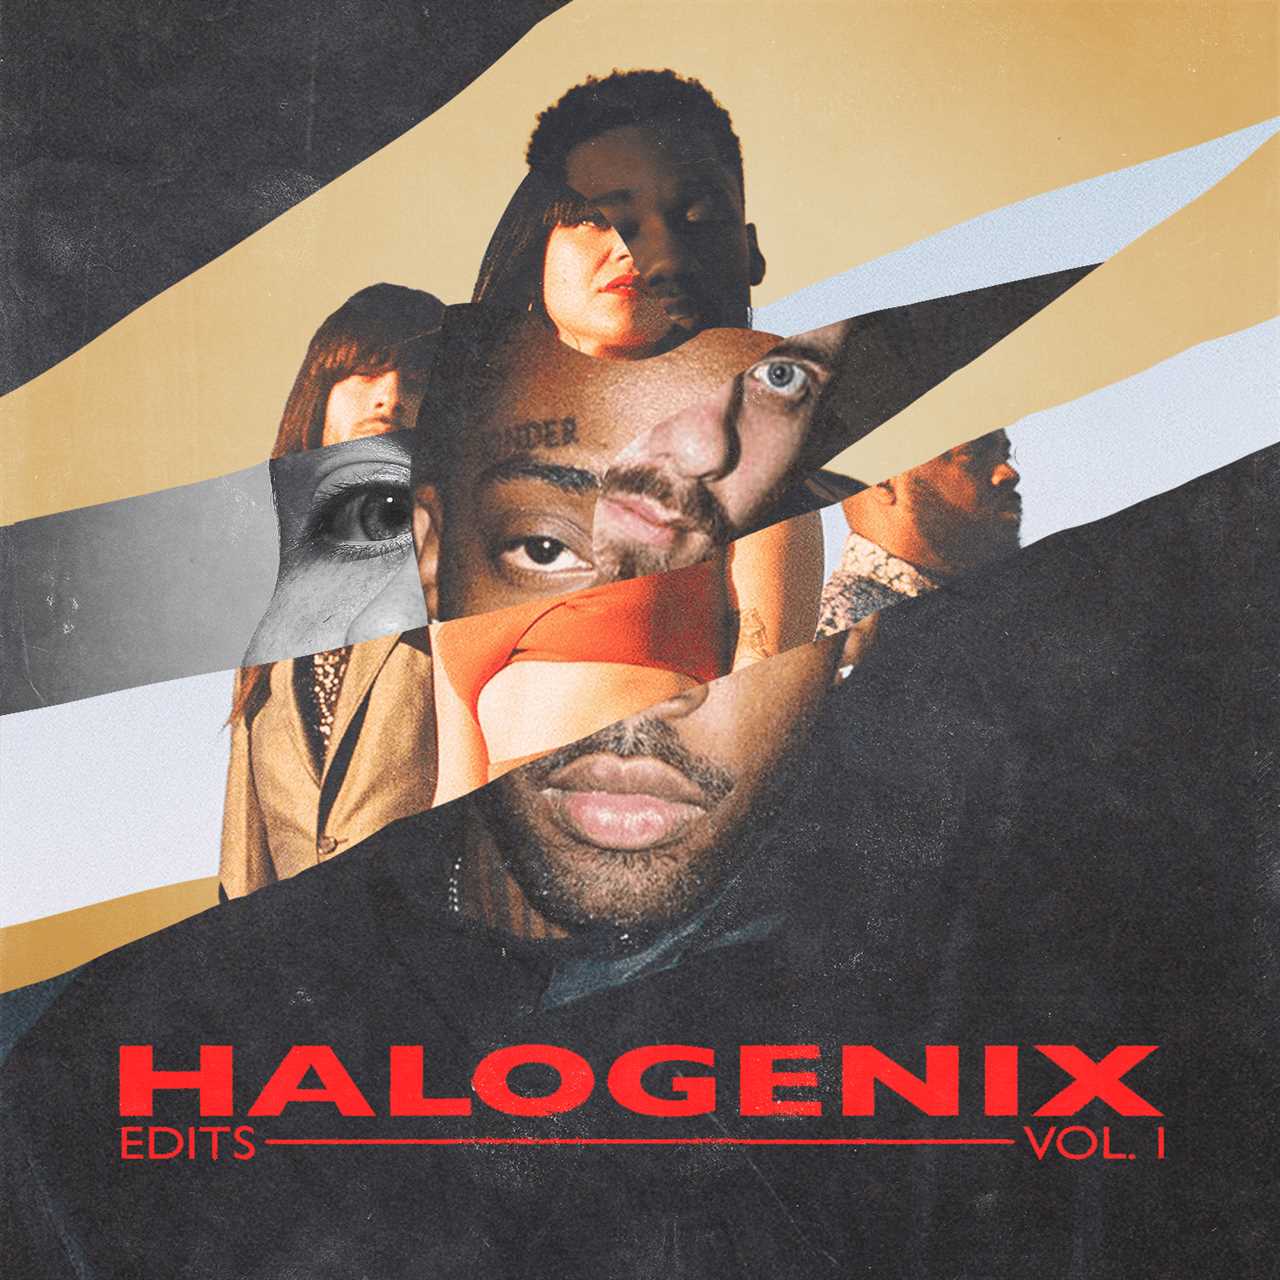 Halogenix is raising money for vital causes with his new edits series